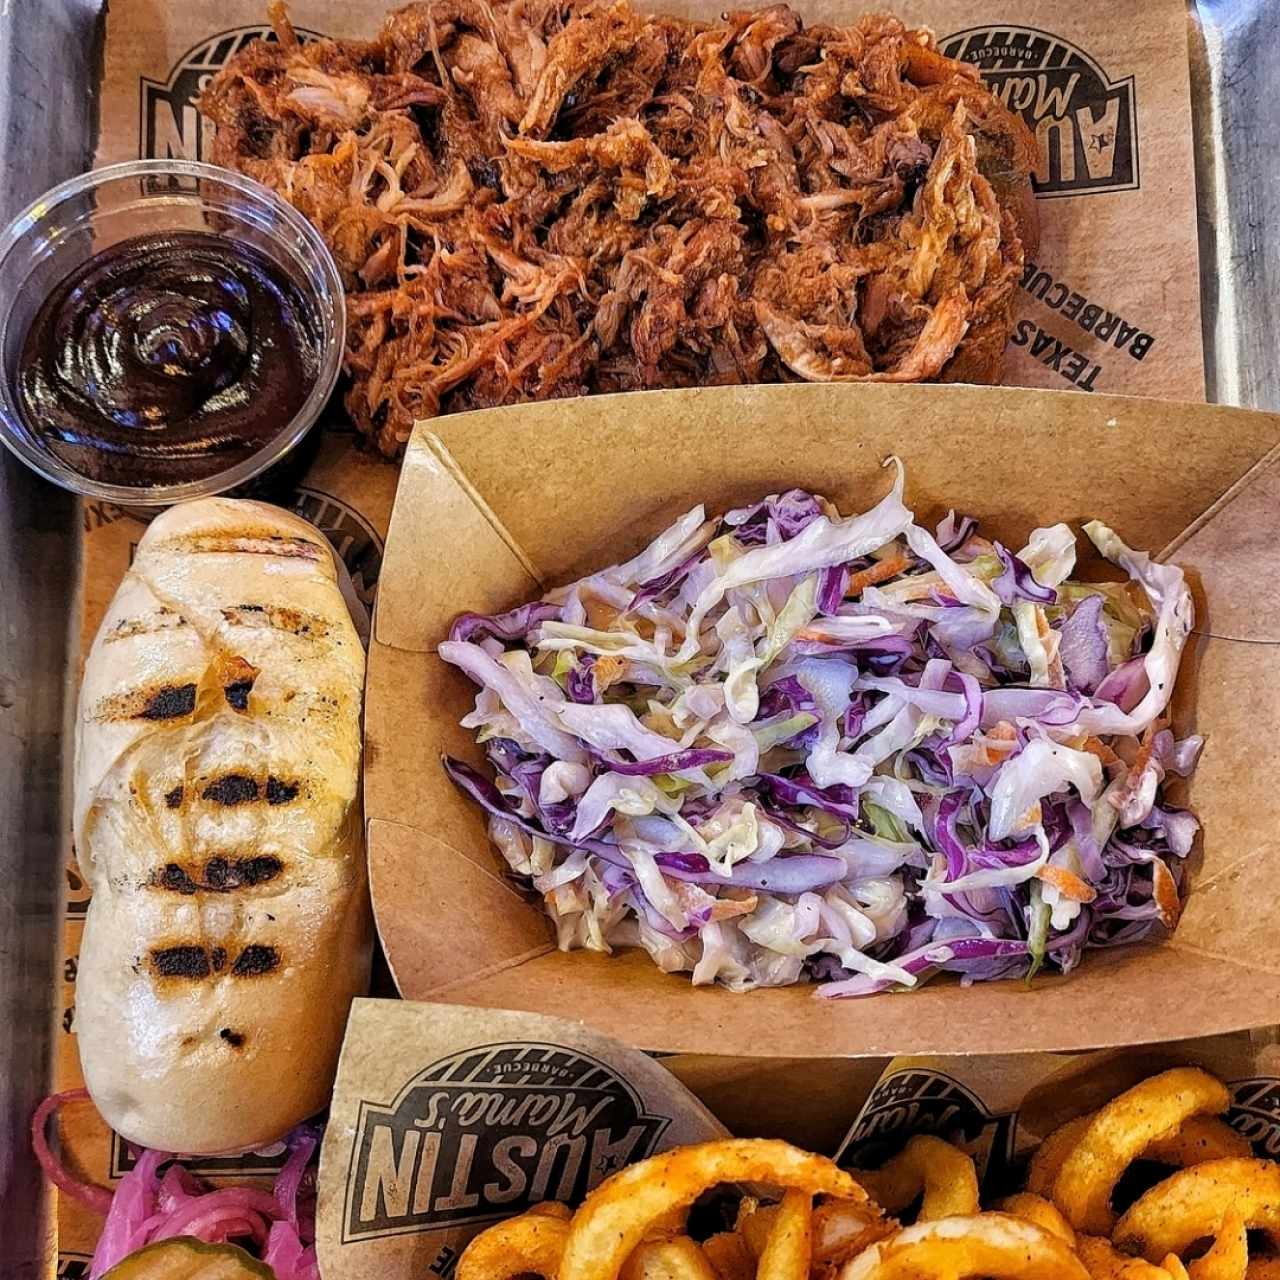 Sandwiches & Spuds - Pulled Pork